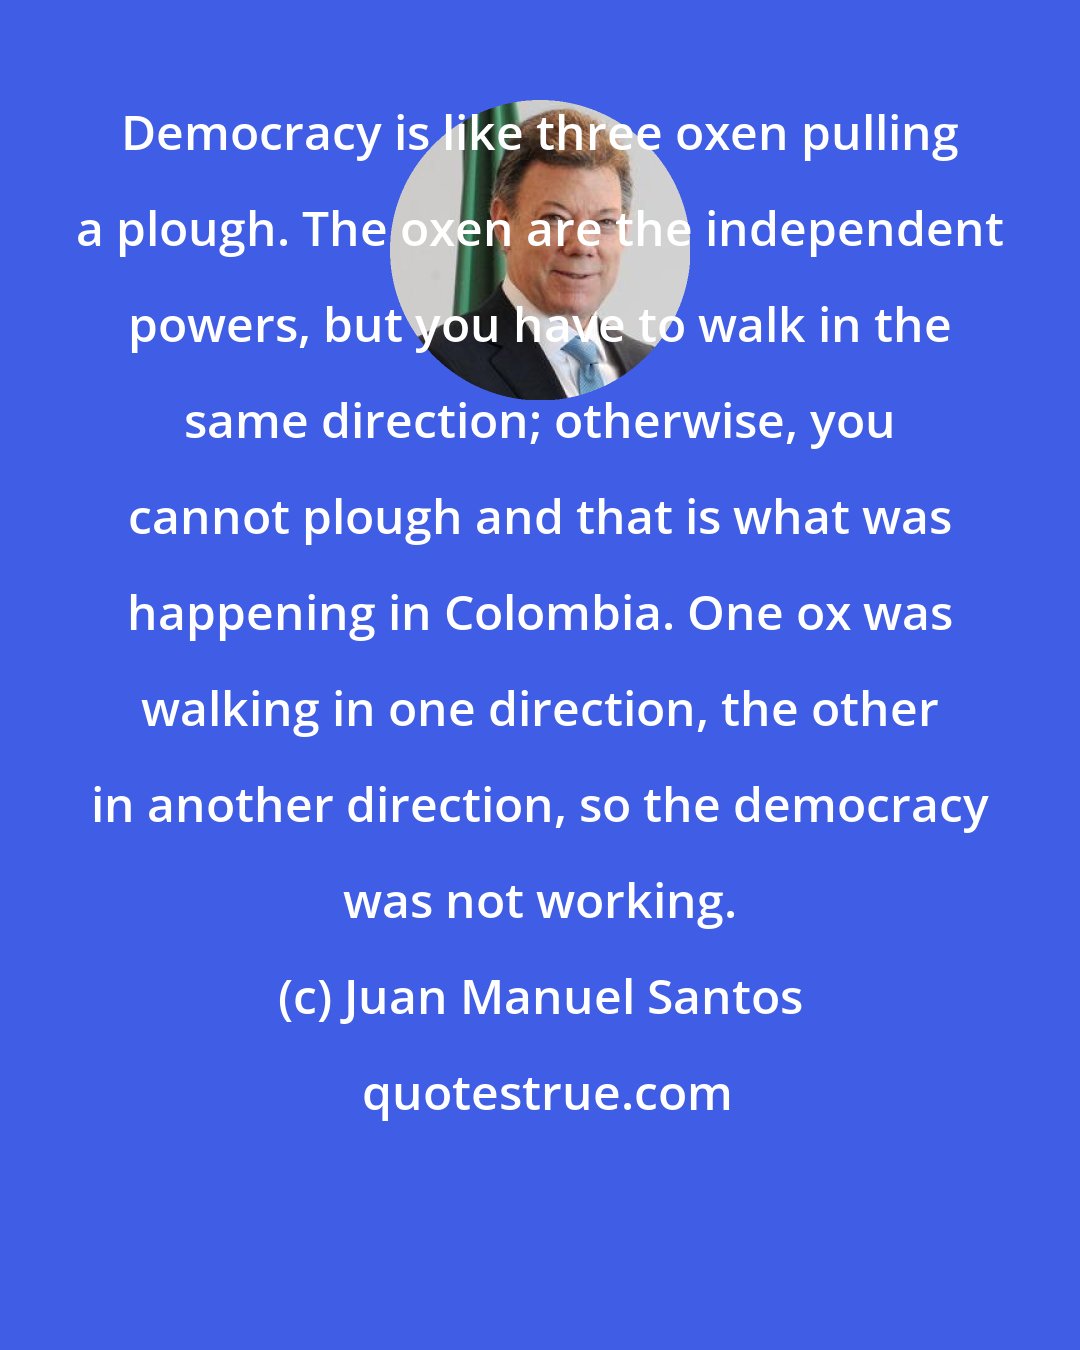 Juan Manuel Santos: Democracy is like three oxen pulling a plough. The oxen are the independent powers, but you have to walk in the same direction; otherwise, you cannot plough and that is what was happening in Colombia. One ox was walking in one direction, the other in another direction, so the democracy was not working.